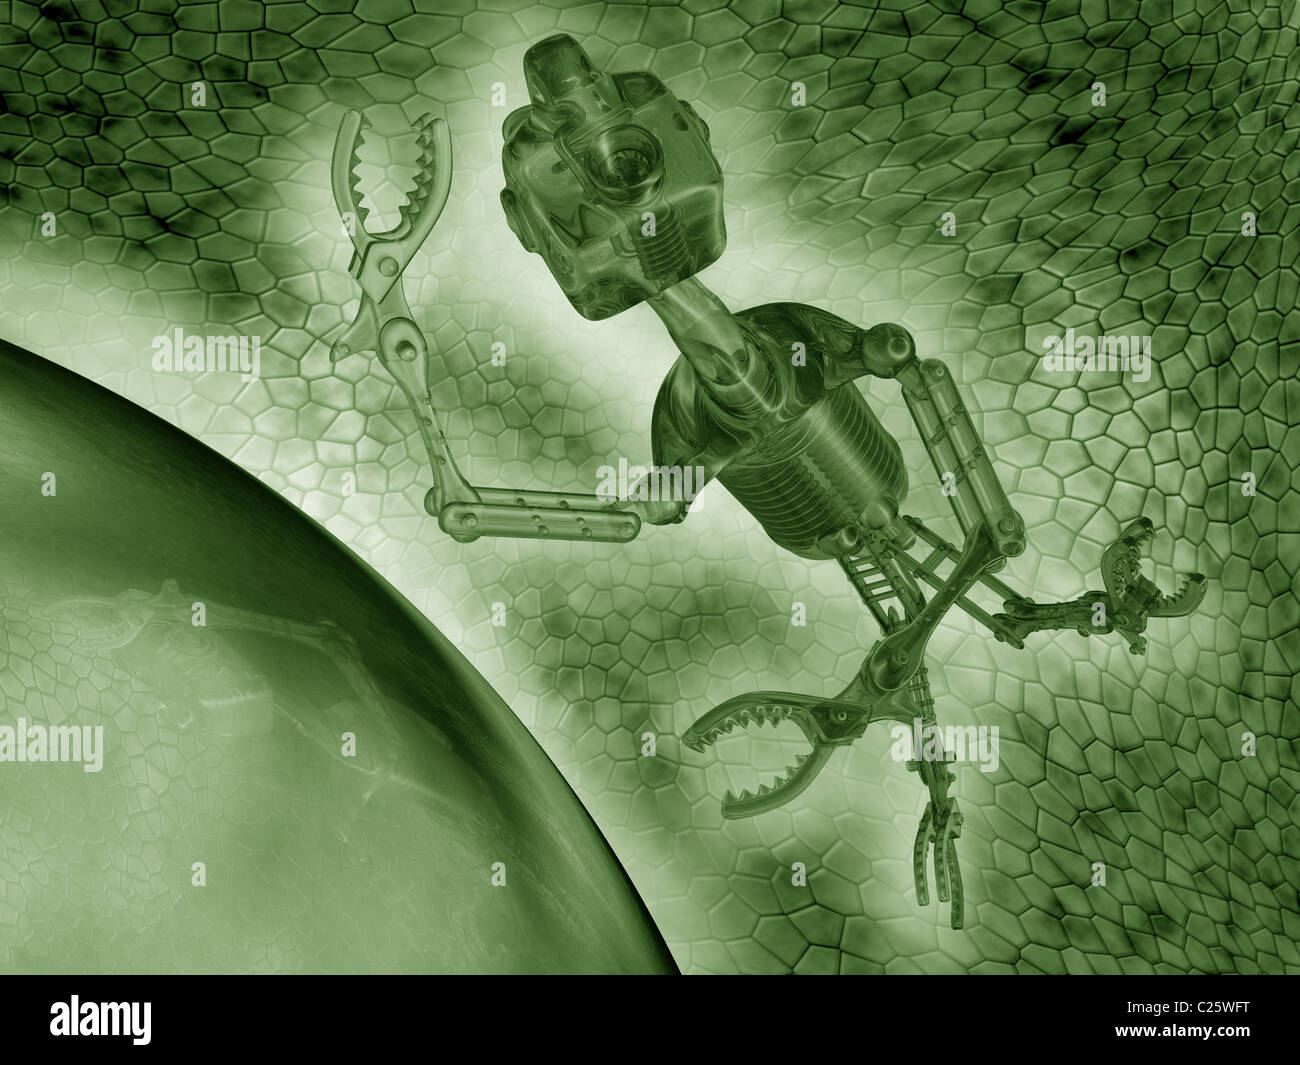 Illustration of a nanobot working in a microscopic environment Stock Photo